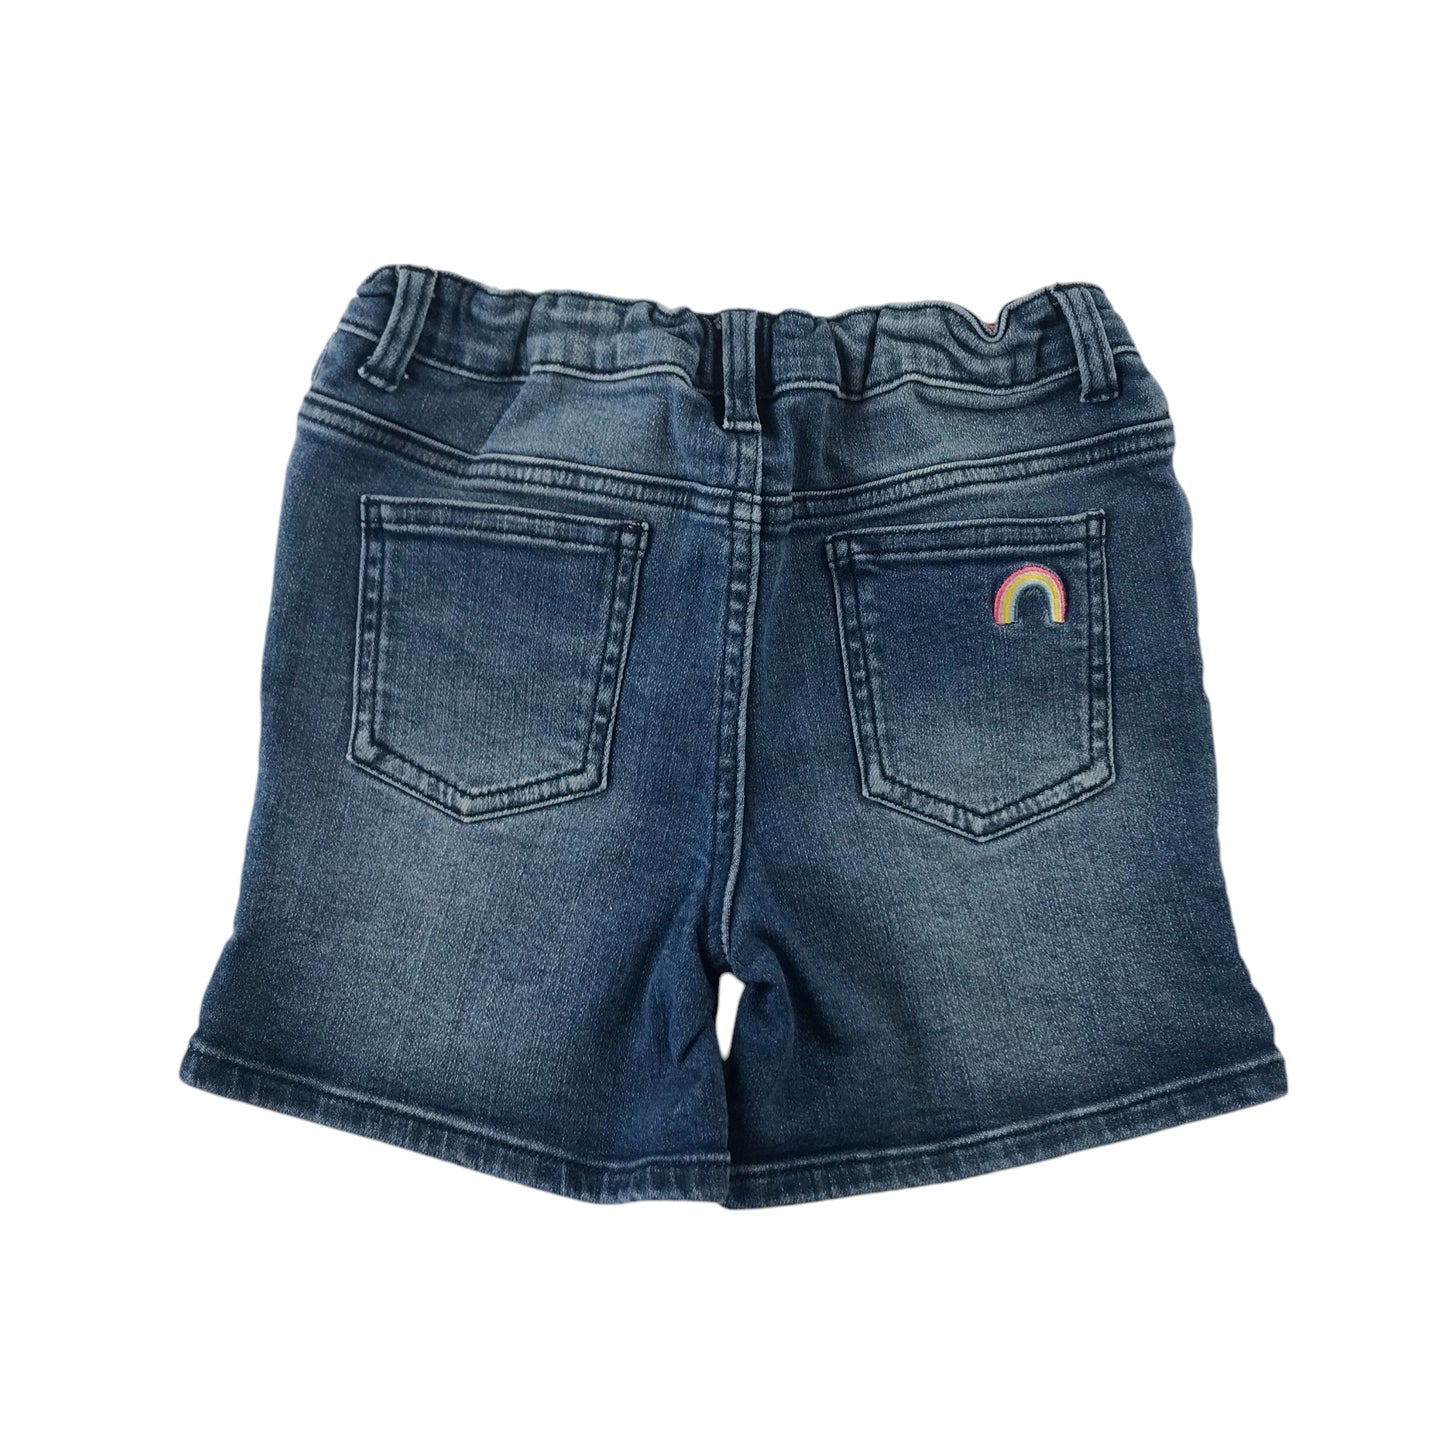 Joules Shorts Age 6 Blue Denim with Rainbow and Rabbit Embroidery